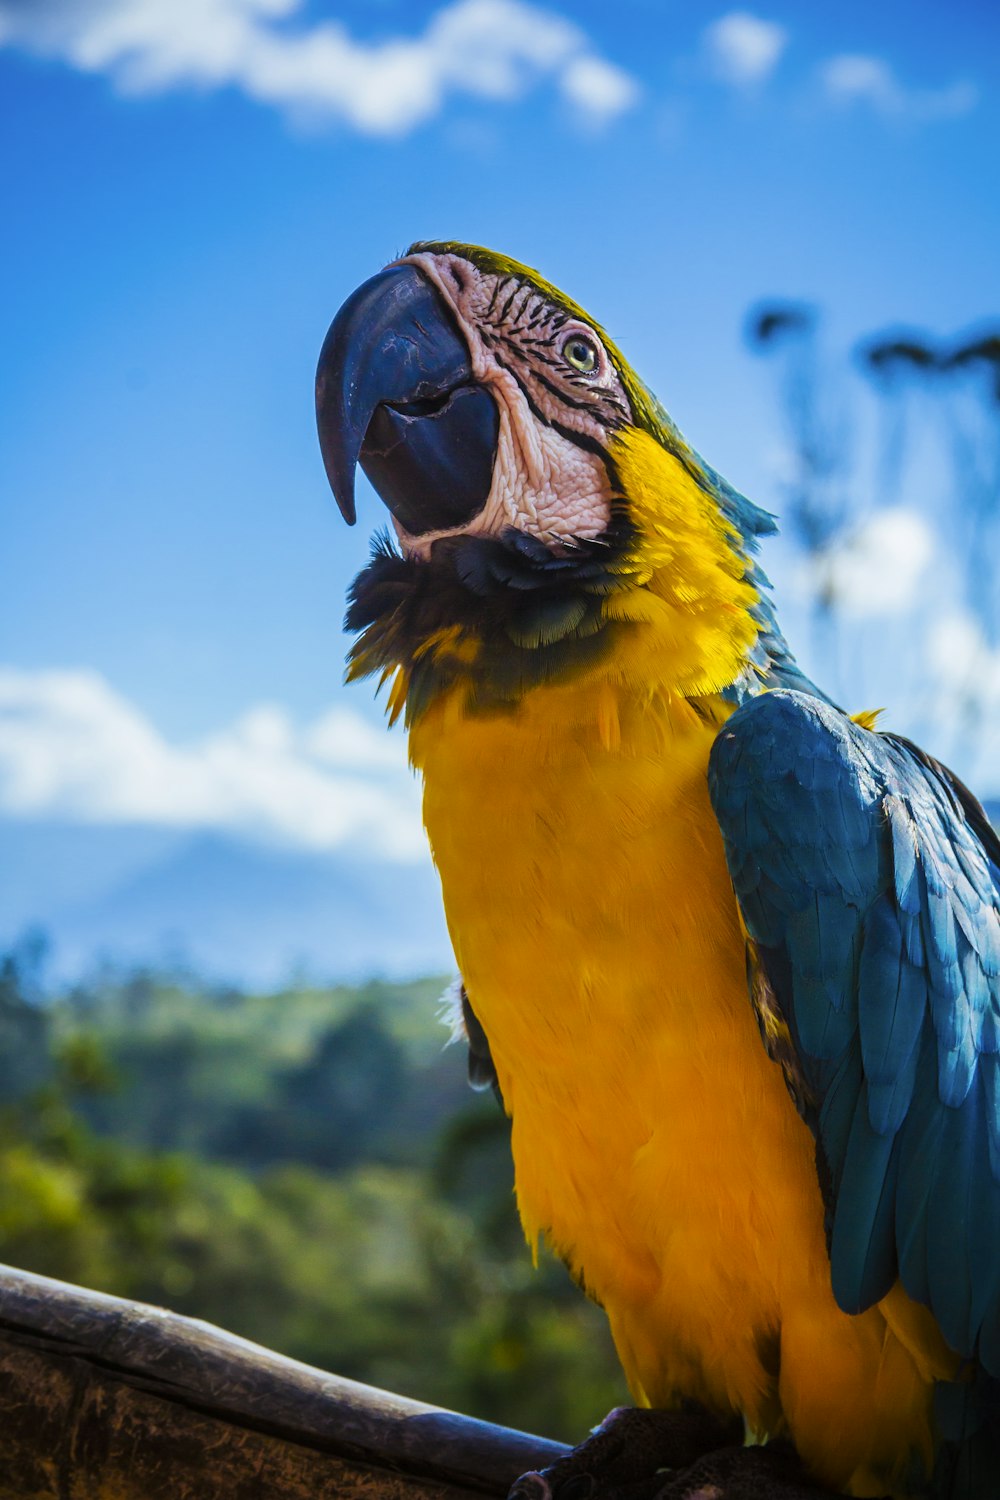 and parrot perched on wood photo Free Bird on Unsplash